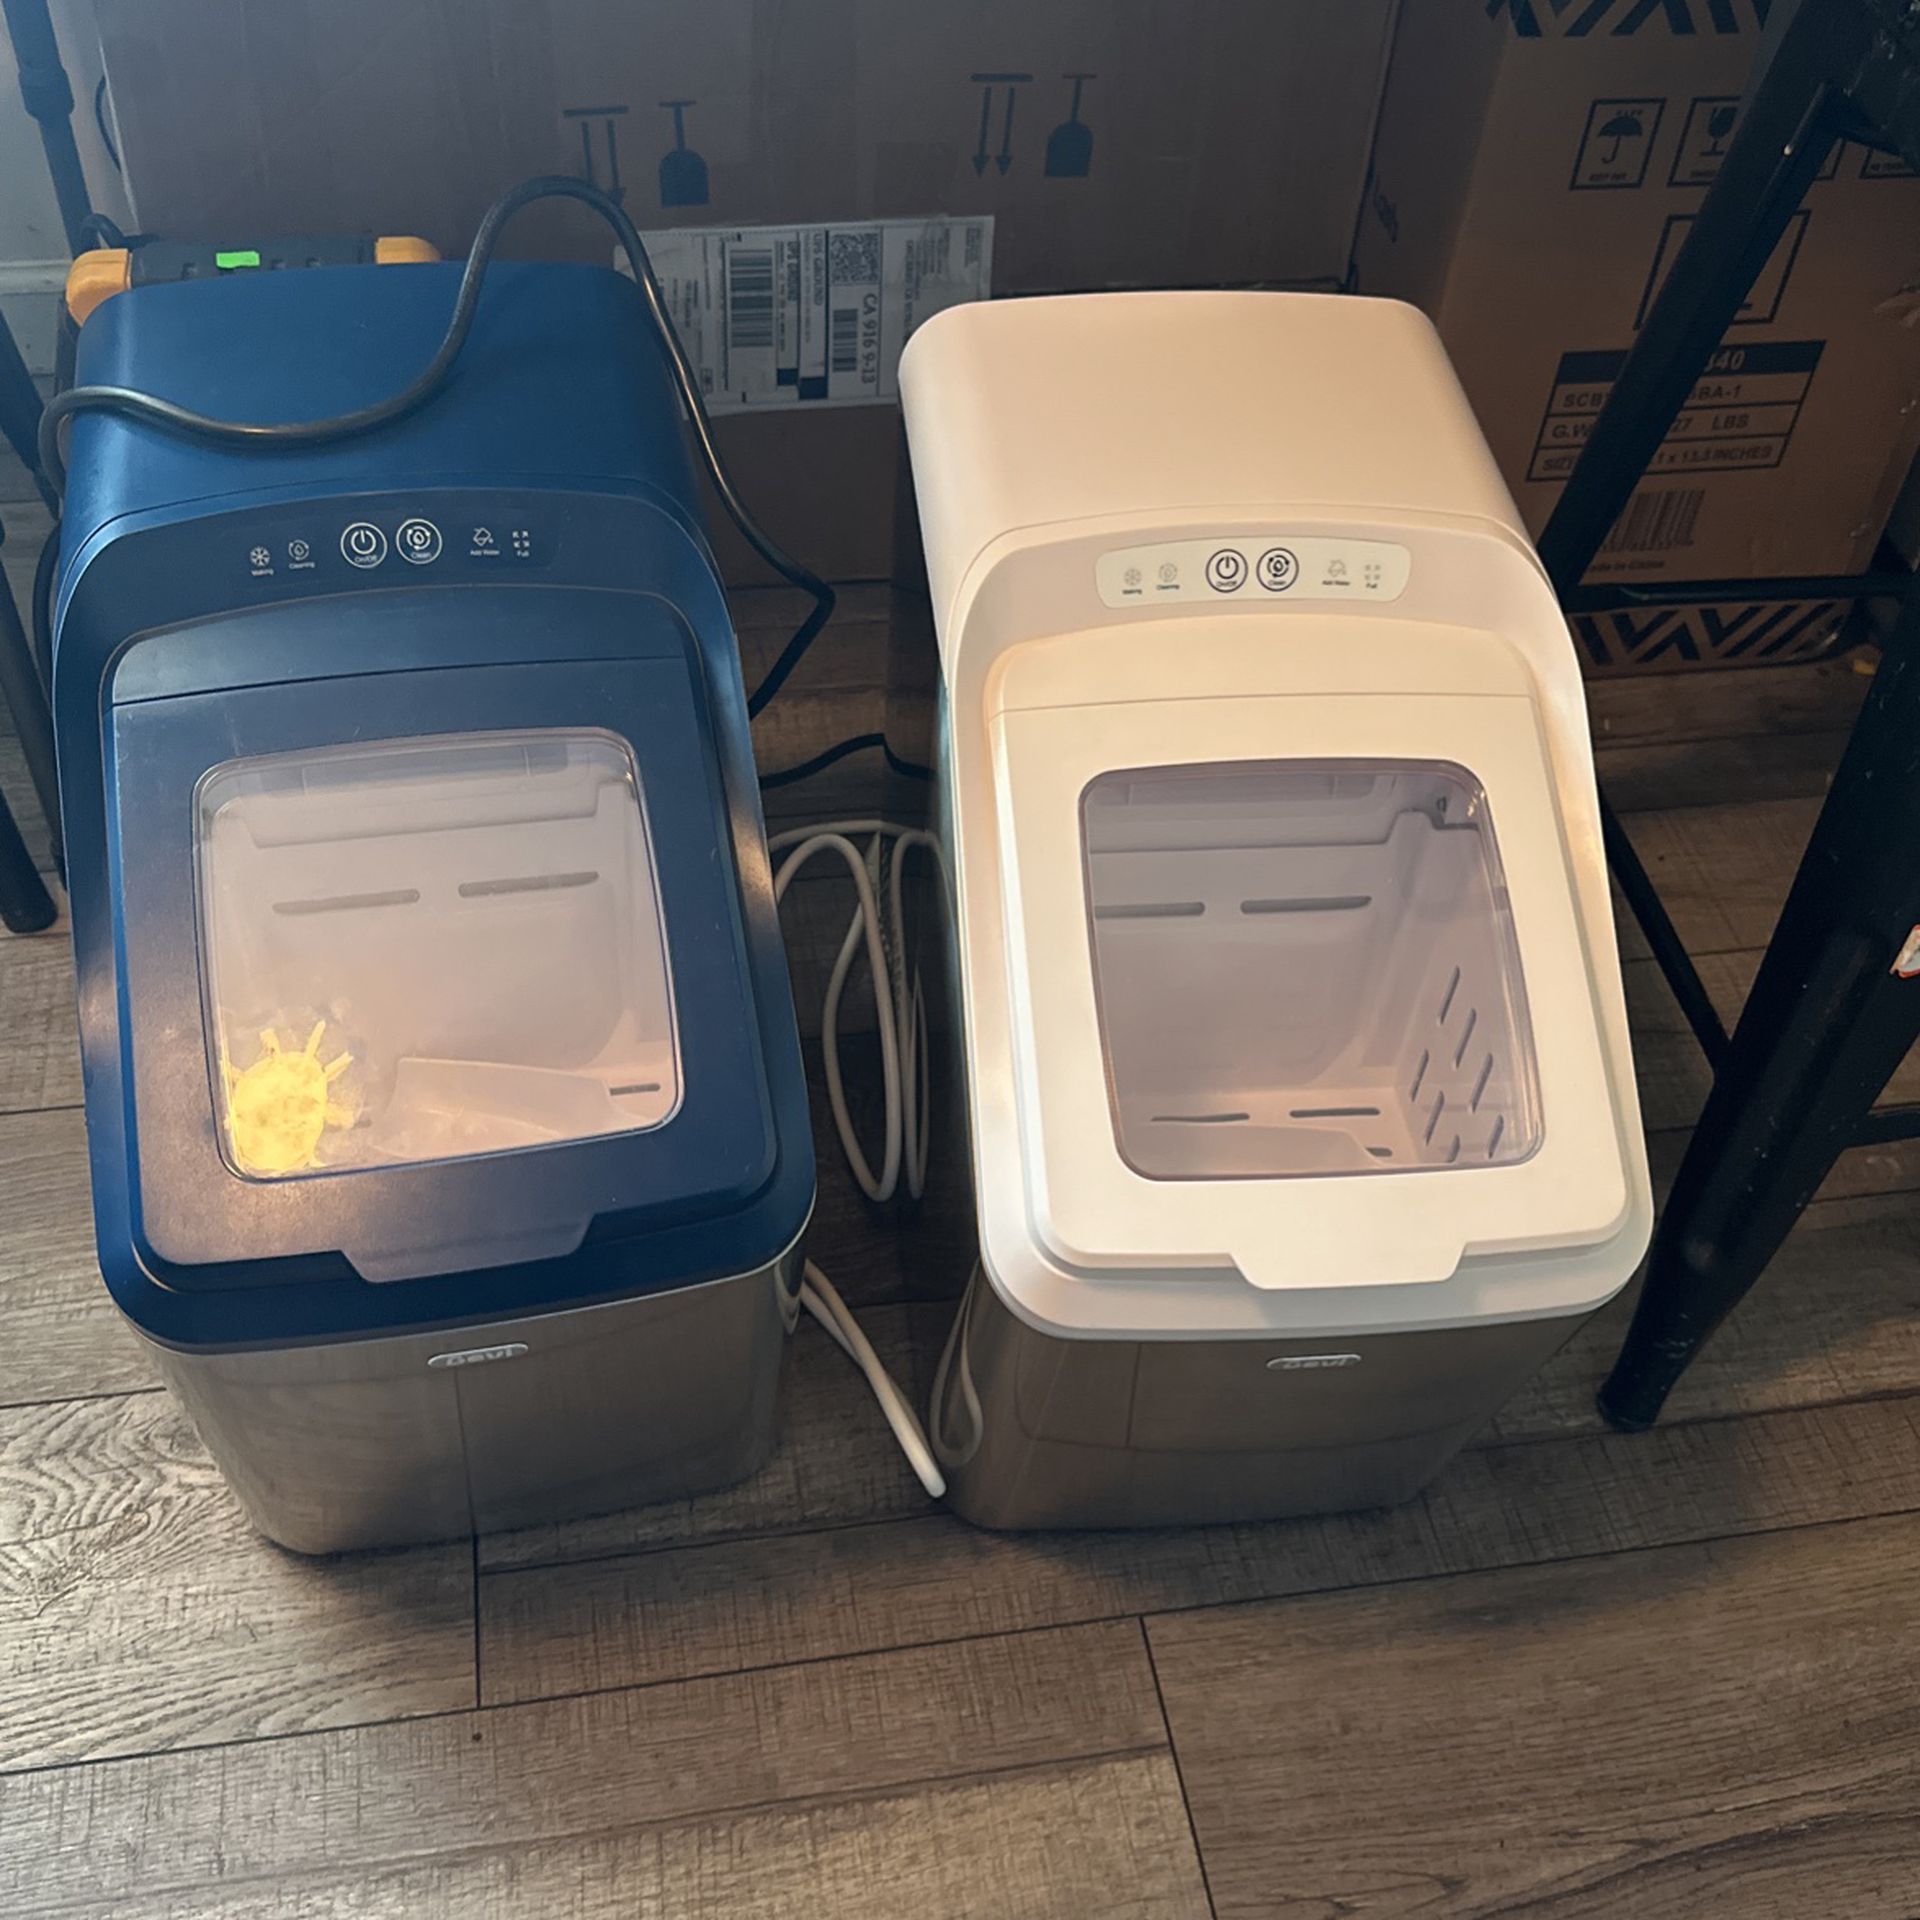 Gevi Nugget Ice Maker for Sale in Woodville, CA - OfferUp